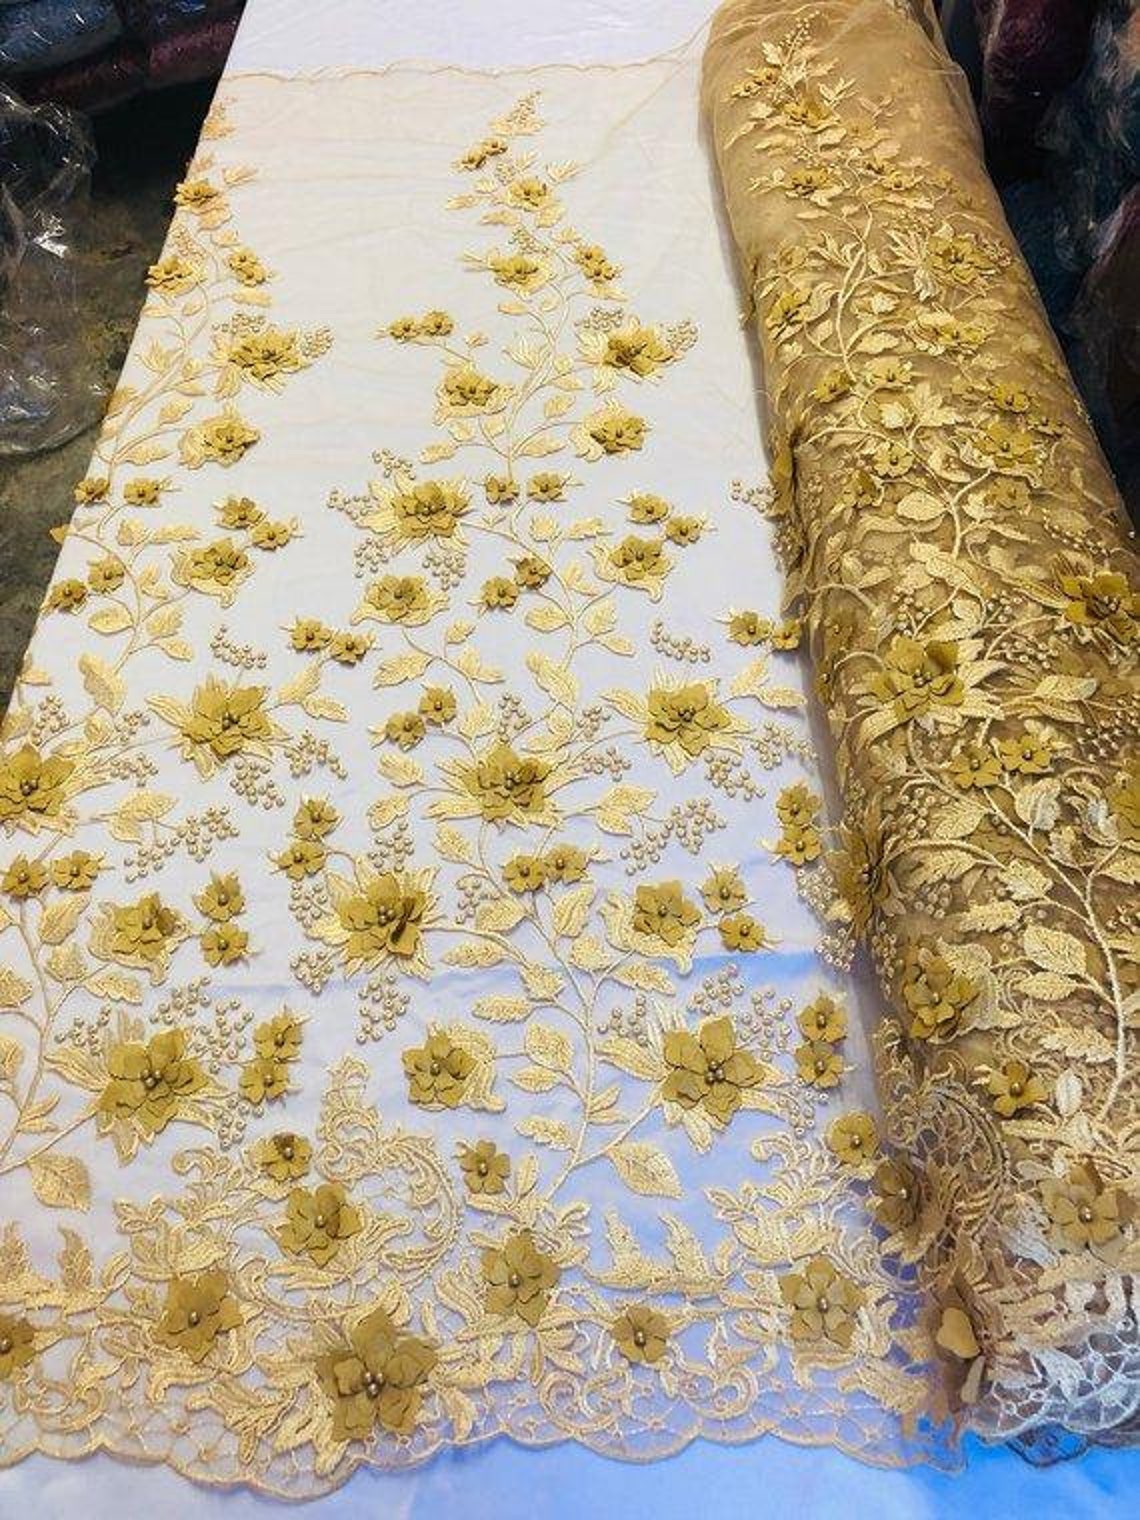 3D Floral Princess Fabric - Gold - Embroidered Floral Lace Fabric with 3D Flowers By Yard